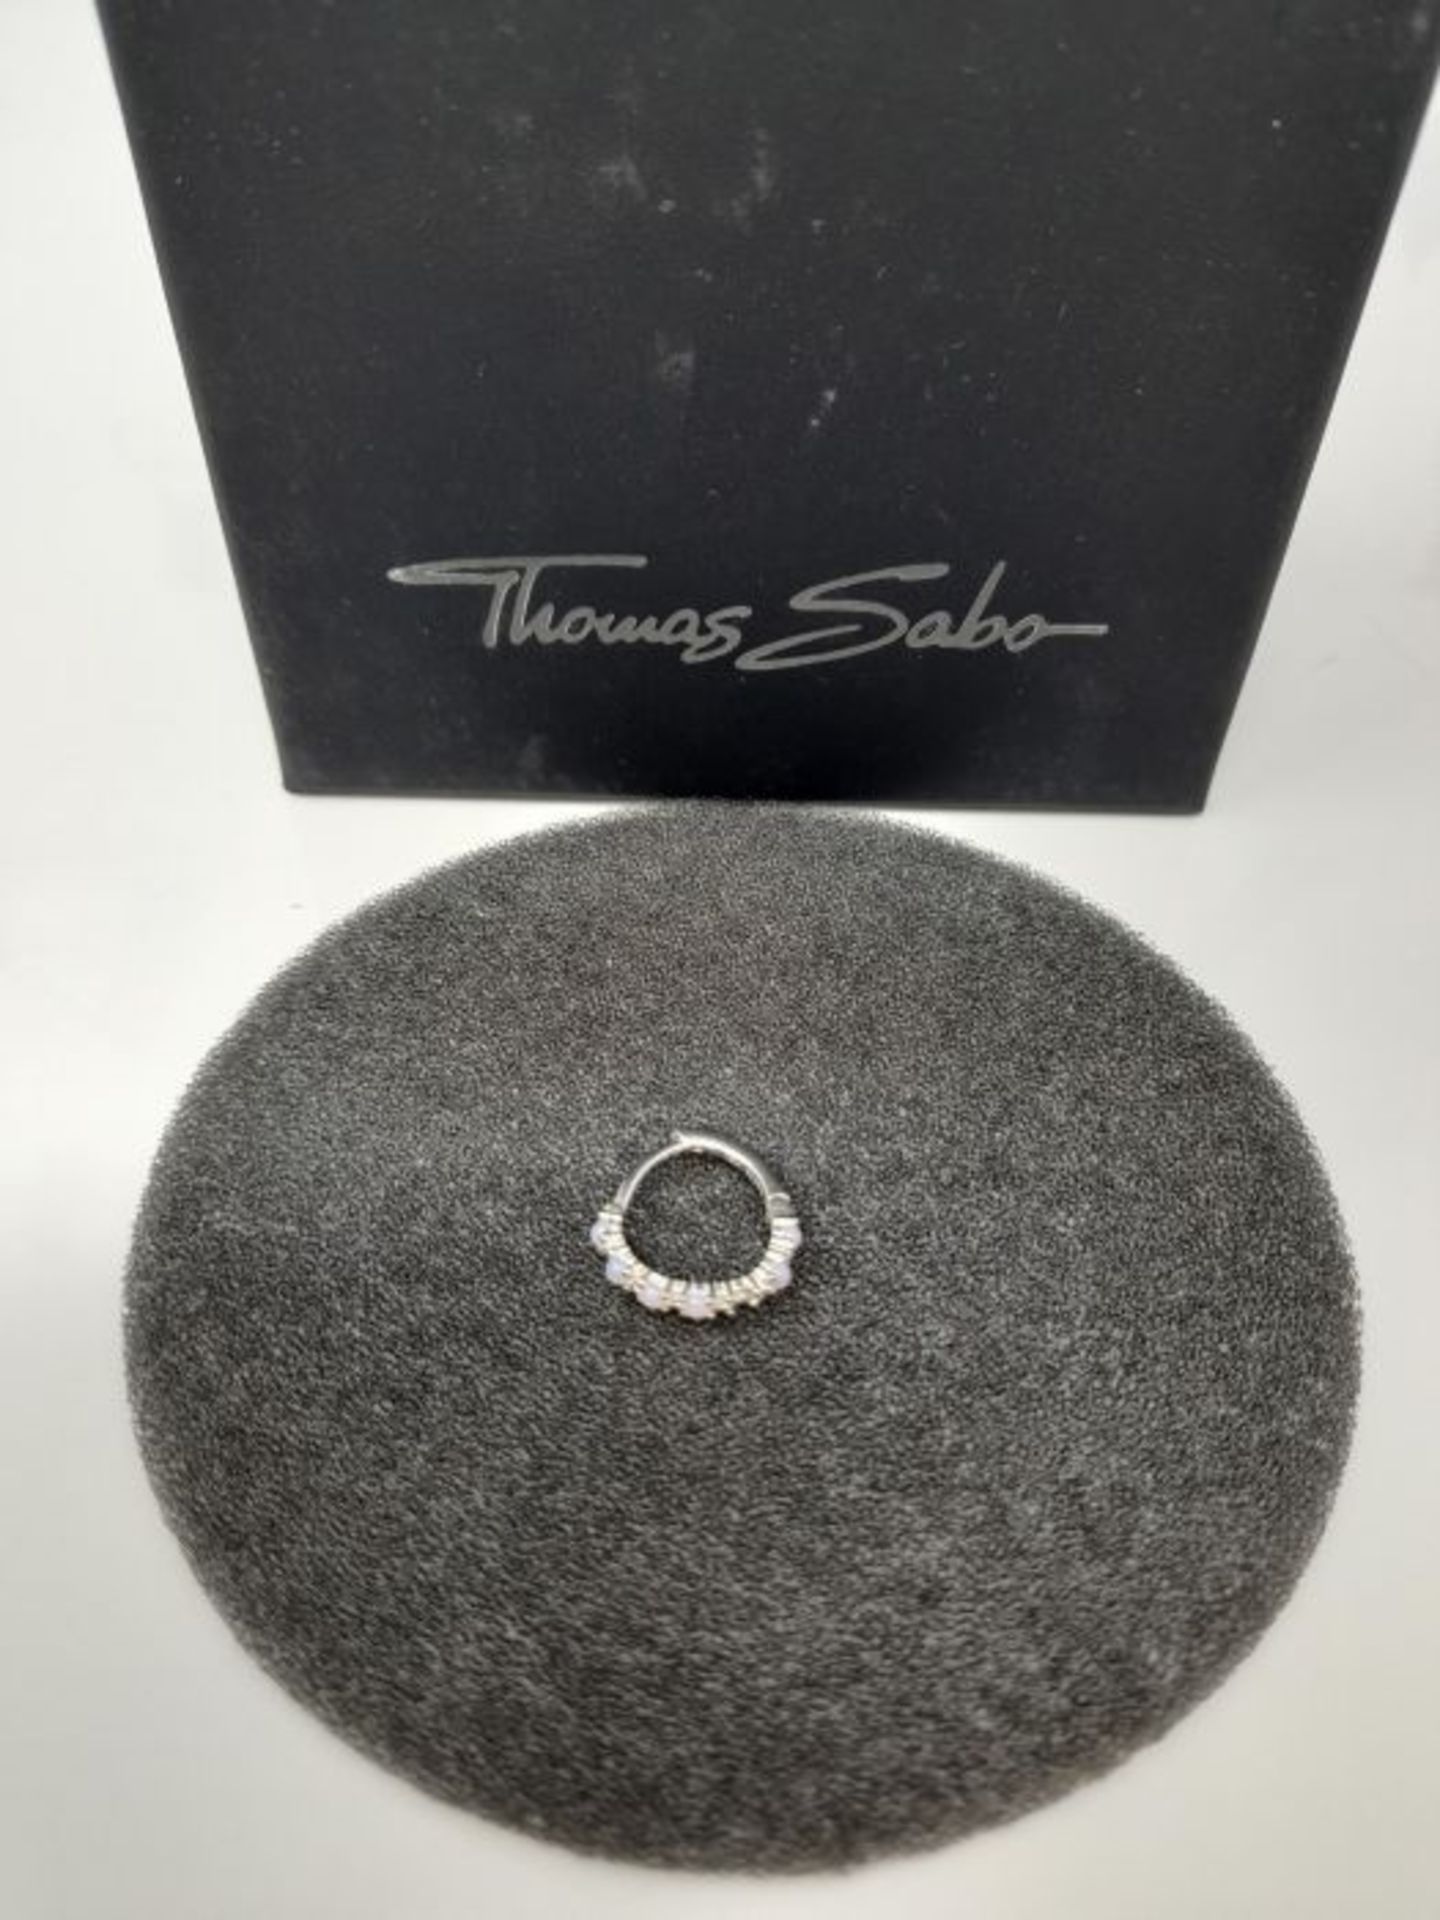 [INCOMPLETE] THOMAS SABO Women's 925 Sterling Silver 15mm Single Hoop Earrings with Pi - Image 2 of 3